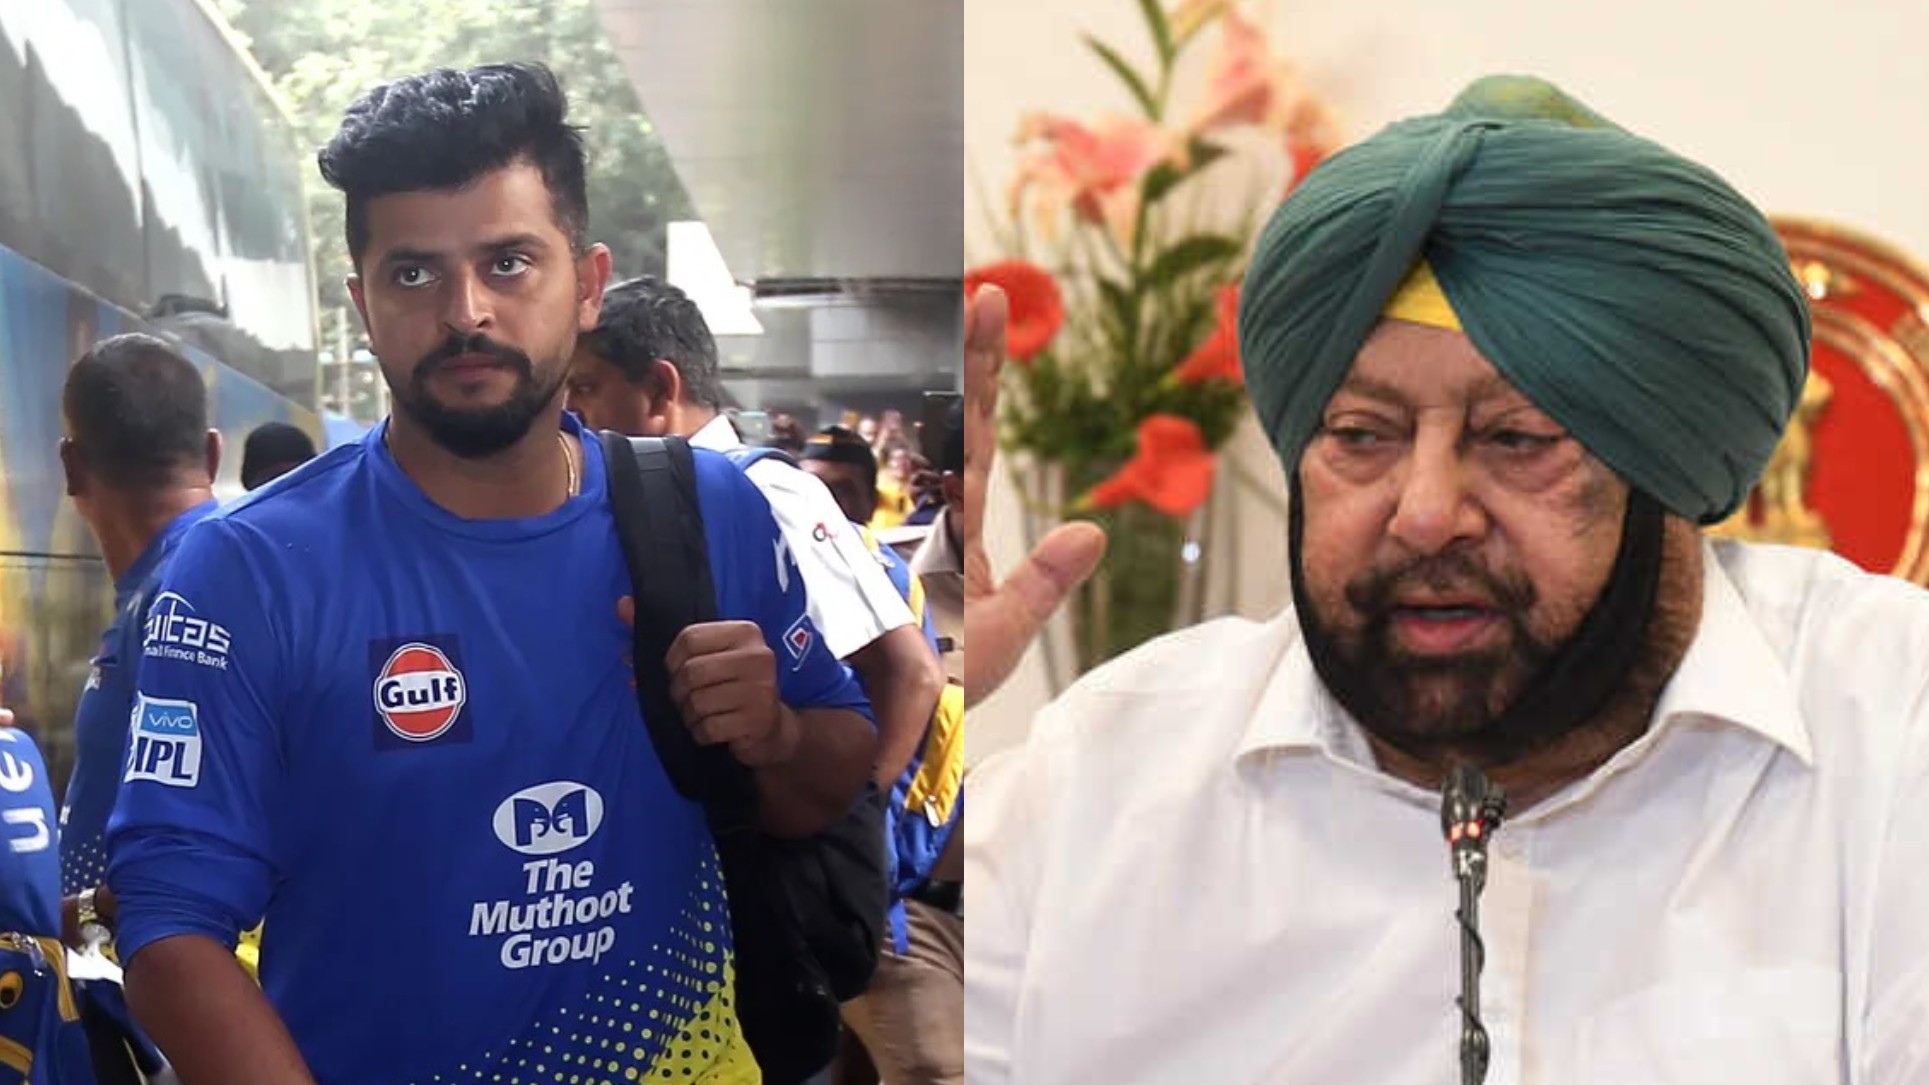 Suresh Raina urges Punjab CM for help, says “My uncle was slaughtered and aunt on life support”